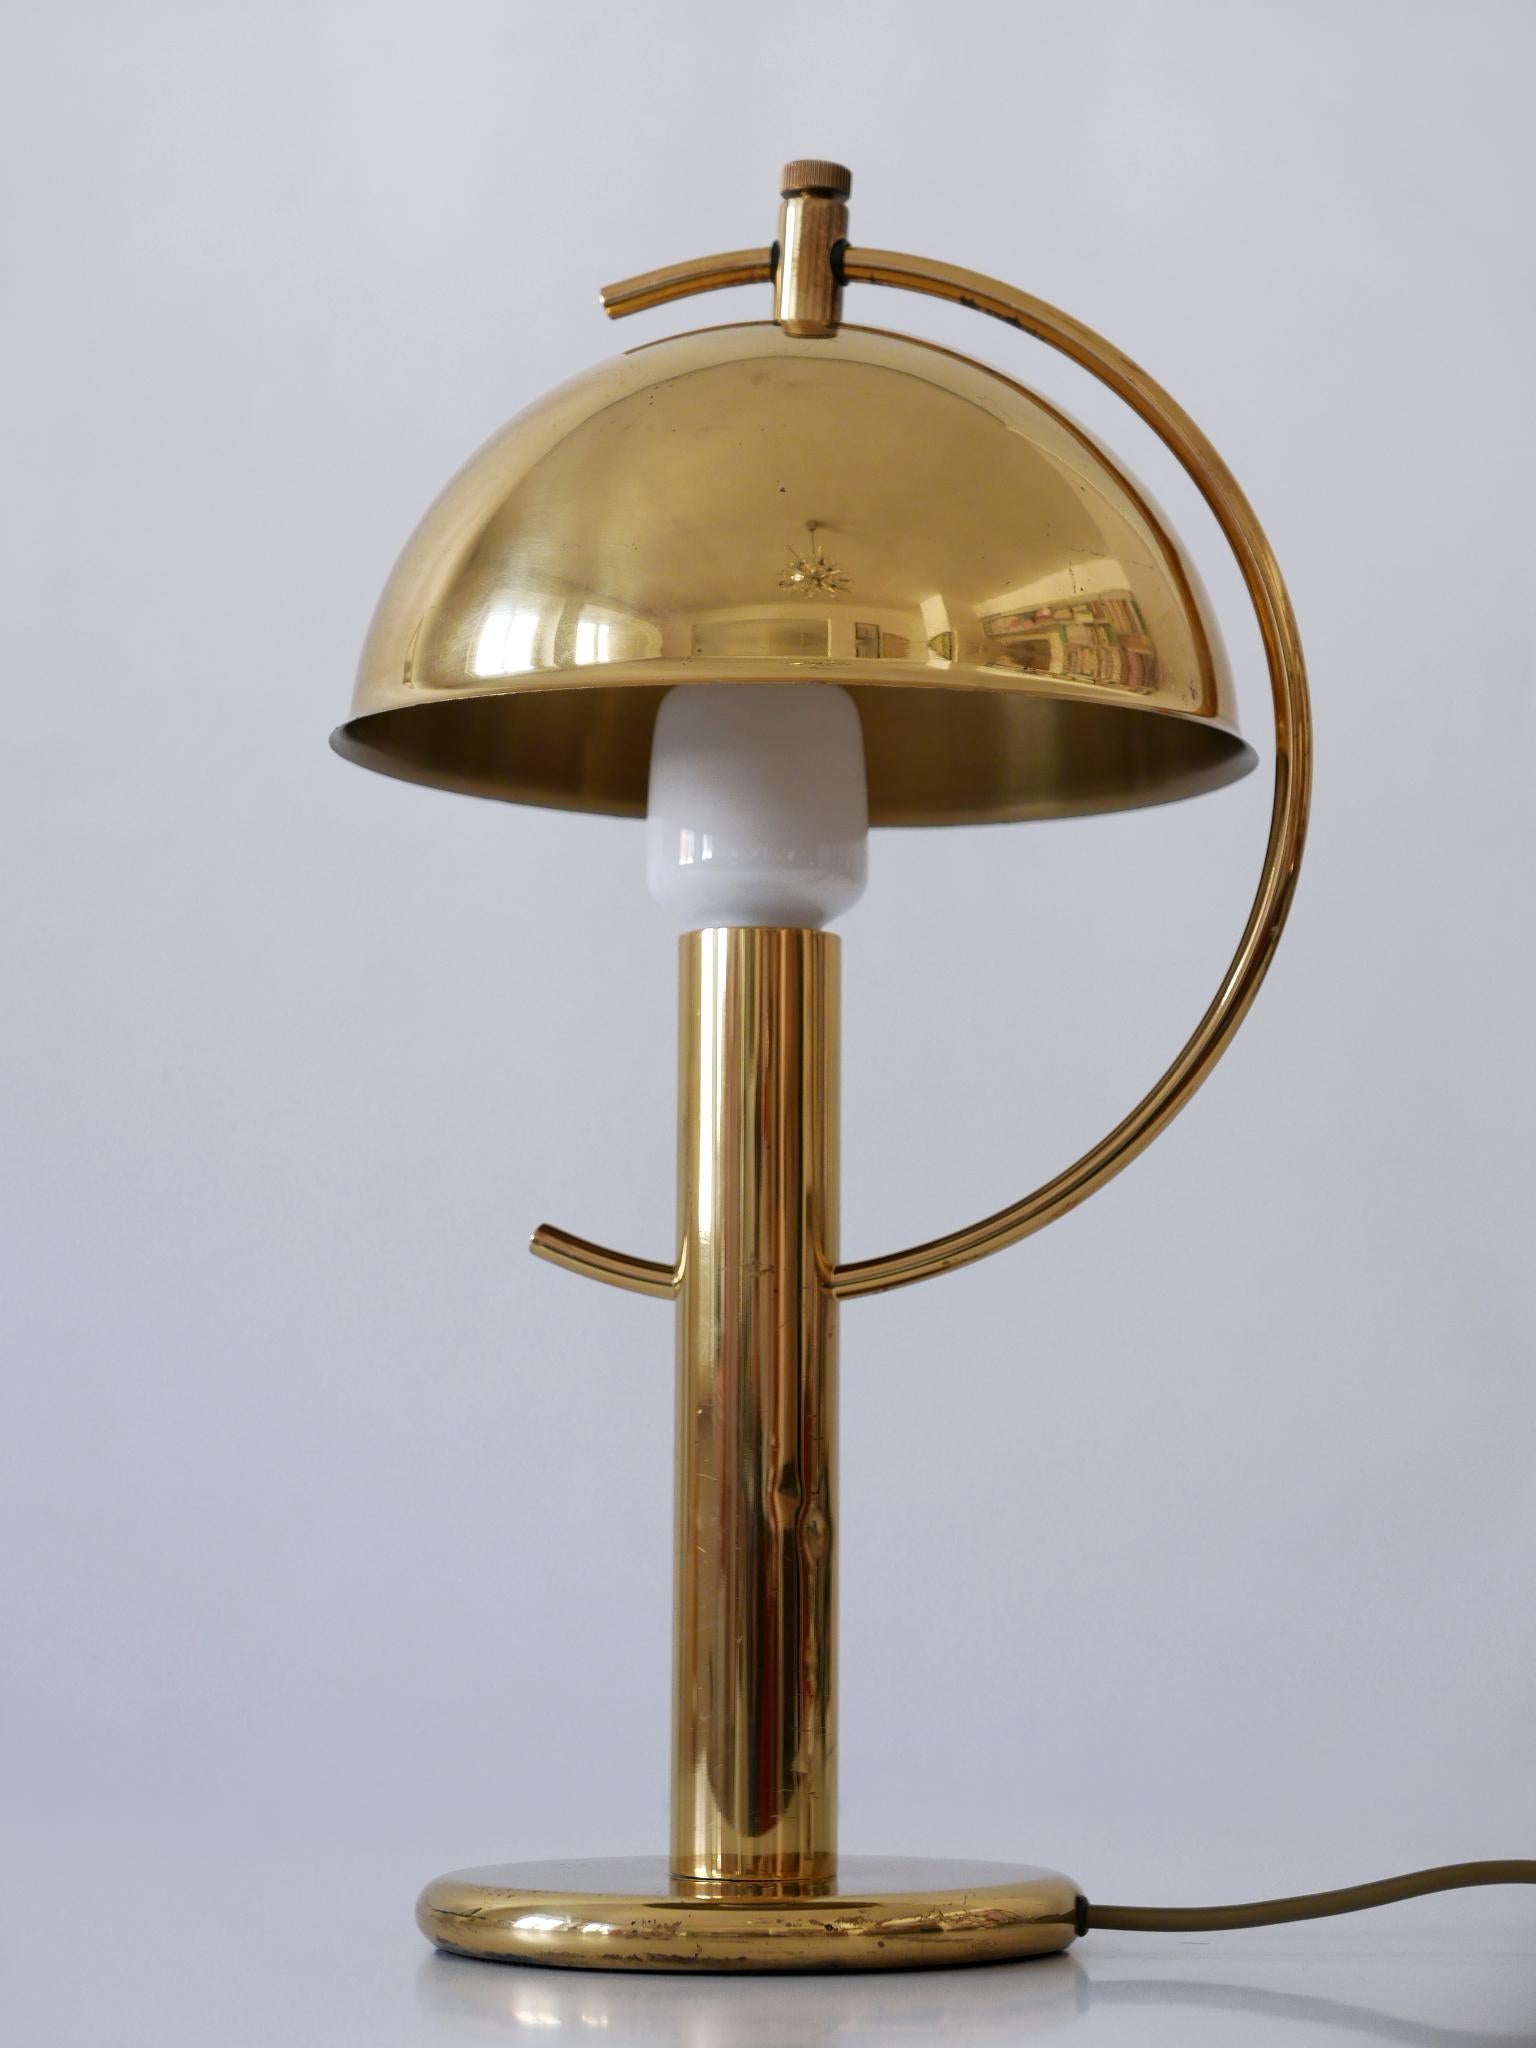 Exceptional Mid-Century Modern Brass Table Lamp by Gebrüder Cosack Germany 1960s For Sale 3